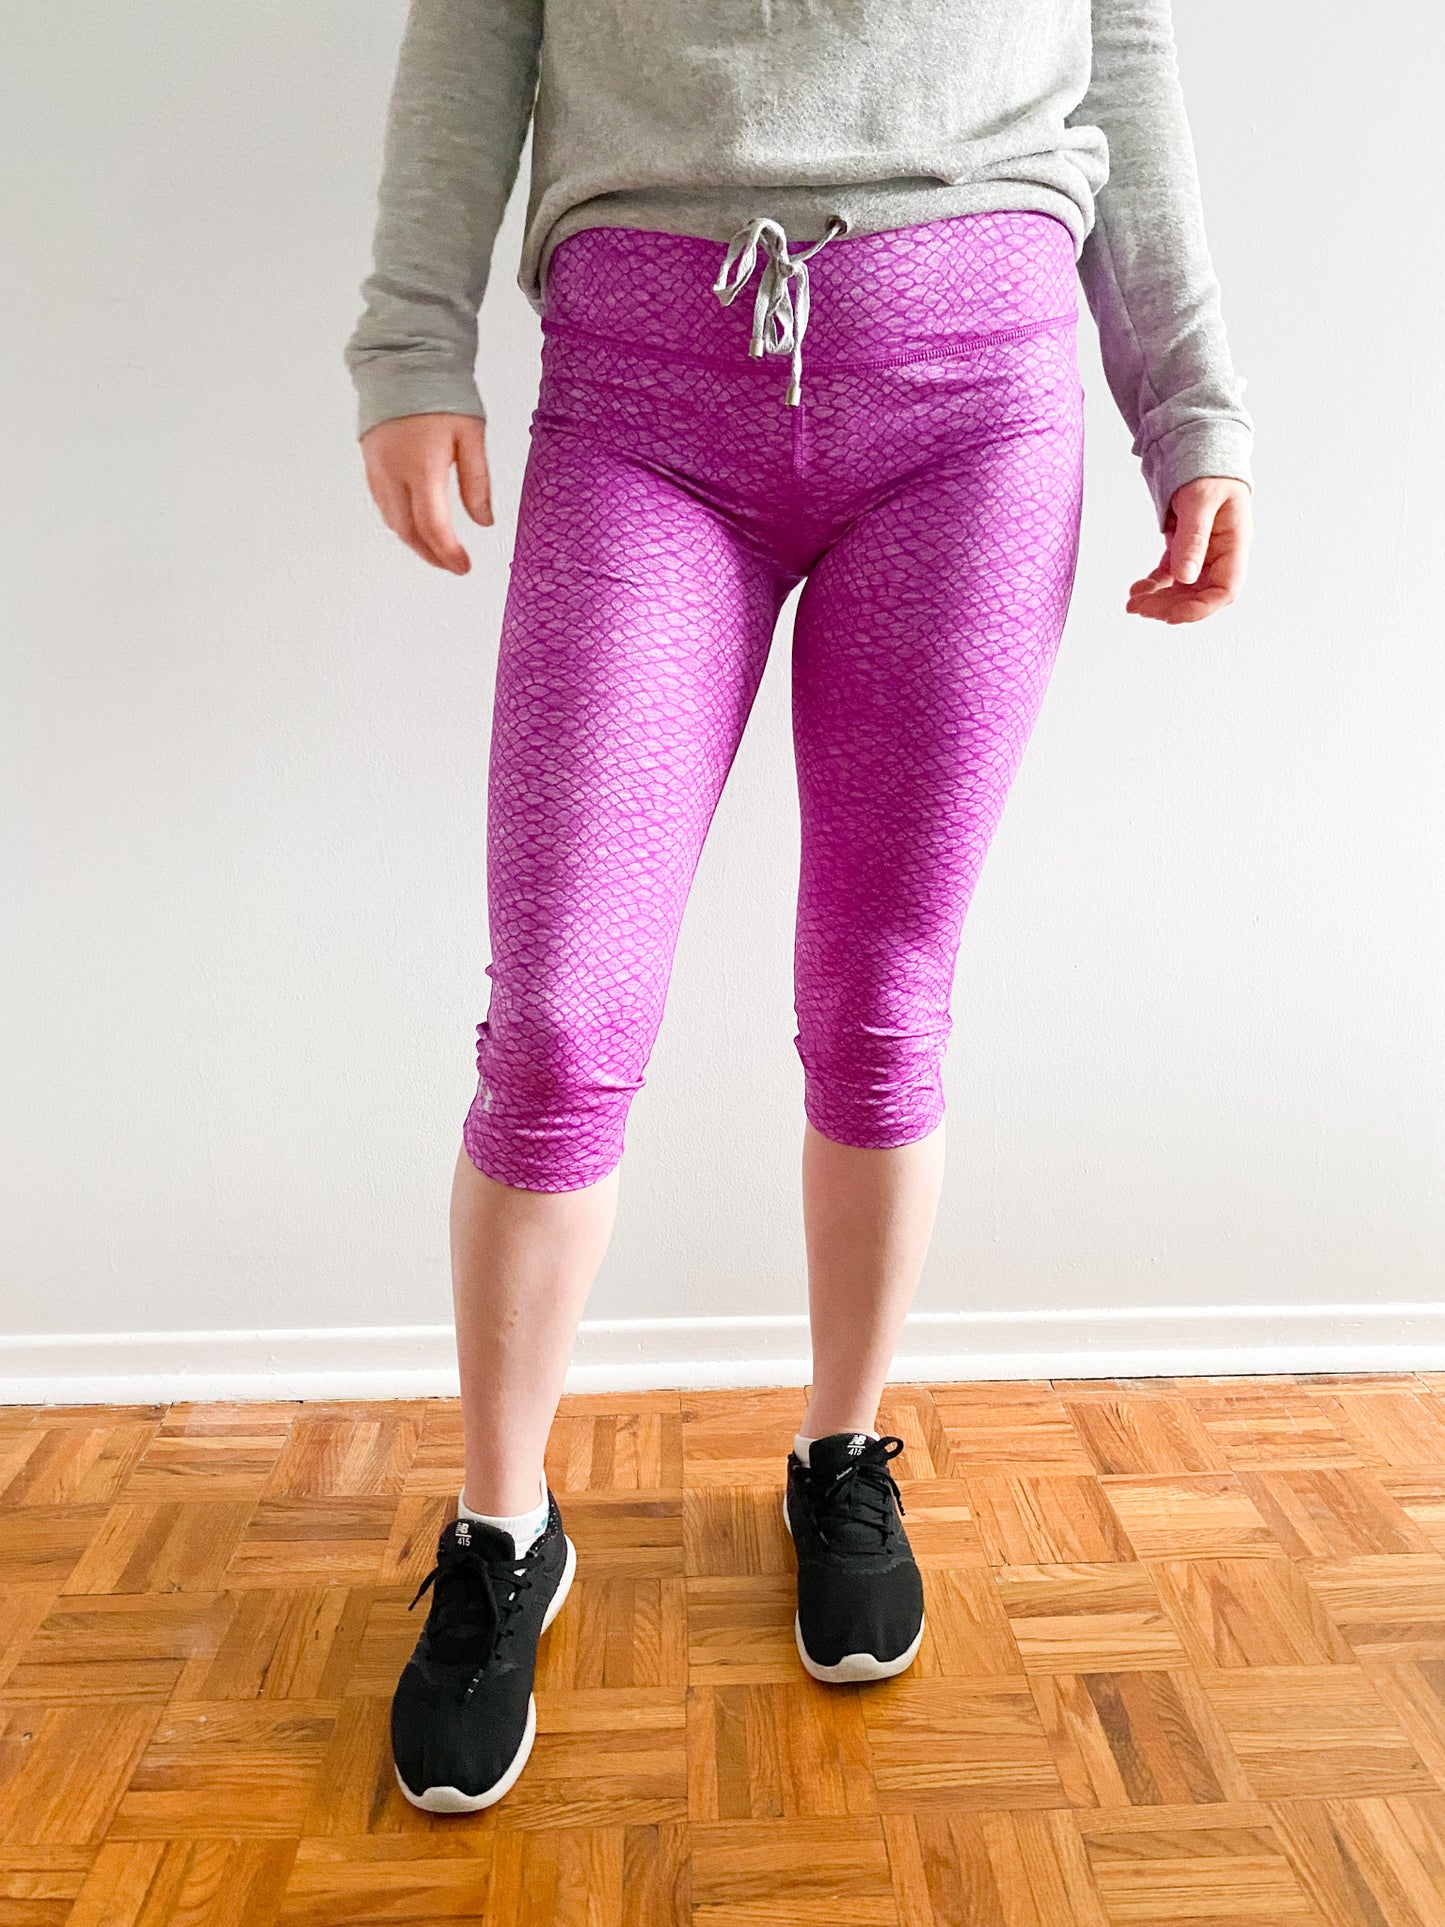 UA Fitted Heat Gear Purple Python Cropped Workout Leggings - Le Prix Fashion & Consulting